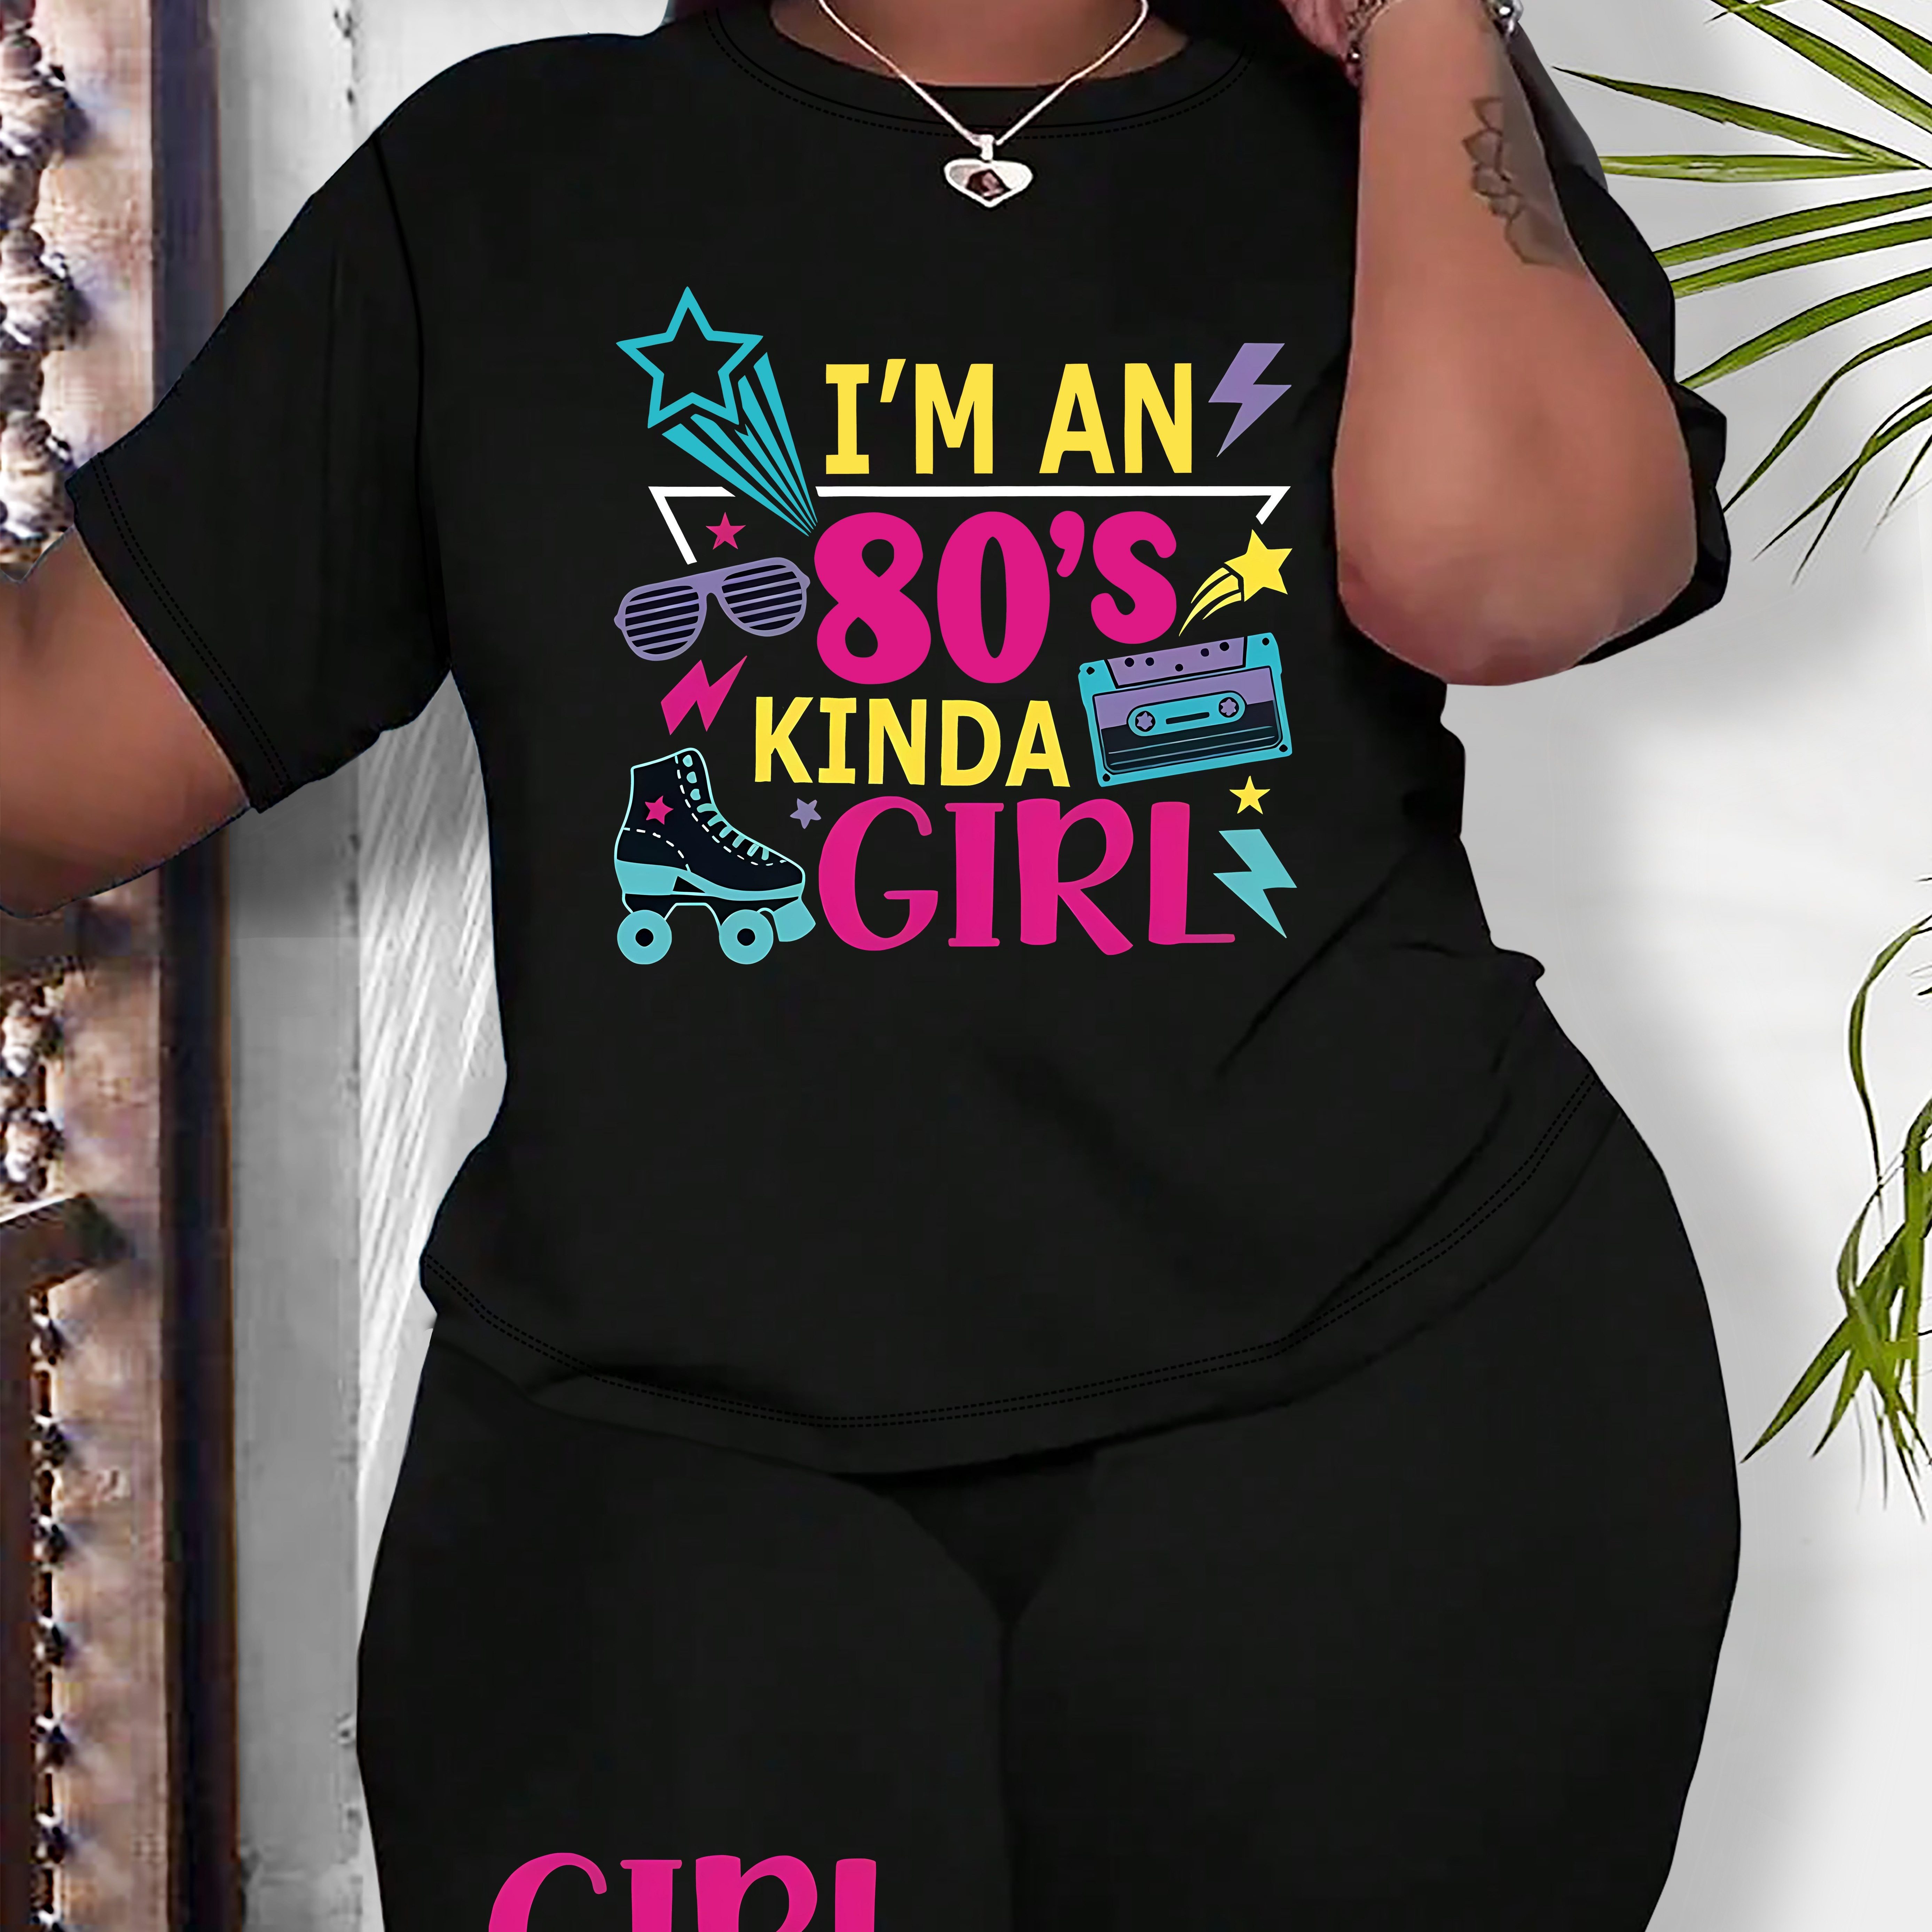 

Plus Size Women's Casual "i'm An 80's Kinda Girl" Printed Fashion Top With Shorts Set, Retro Music Cassette Tee And Sporty Bottoms, Relaxed Fit Outfit For Ladies